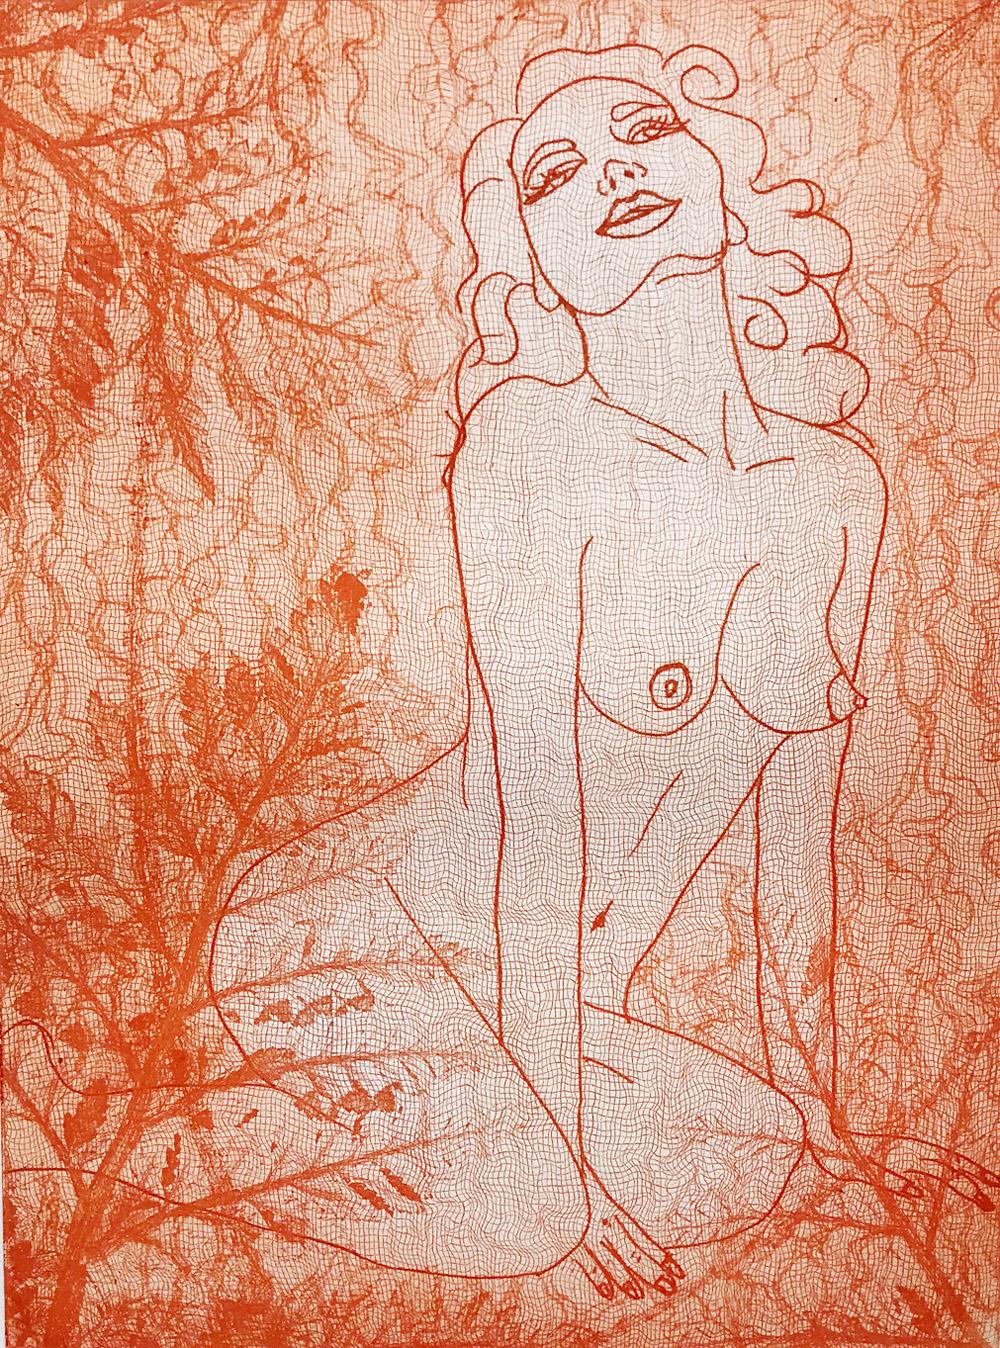 "Tangerine Dream" Intaglio Etching Hand Printed, Rives Cotton Paper, Framed